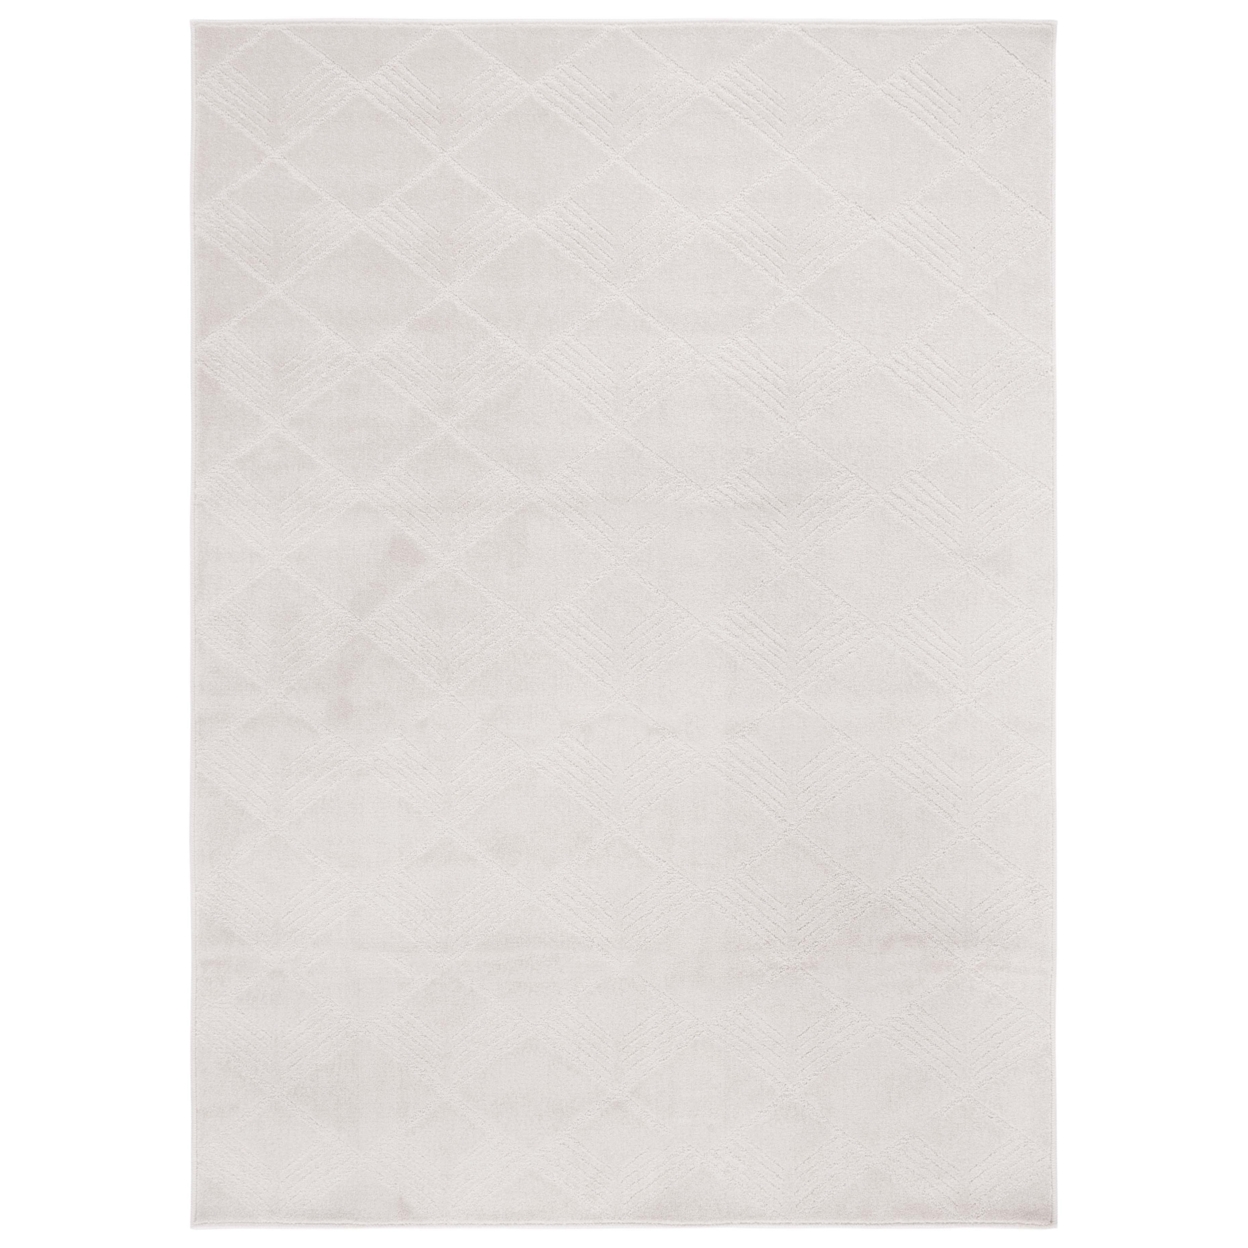 Safavieh PNS414A Pattern And Solid Ivory - Silver / Ivory, 8' X 10' Rectangle